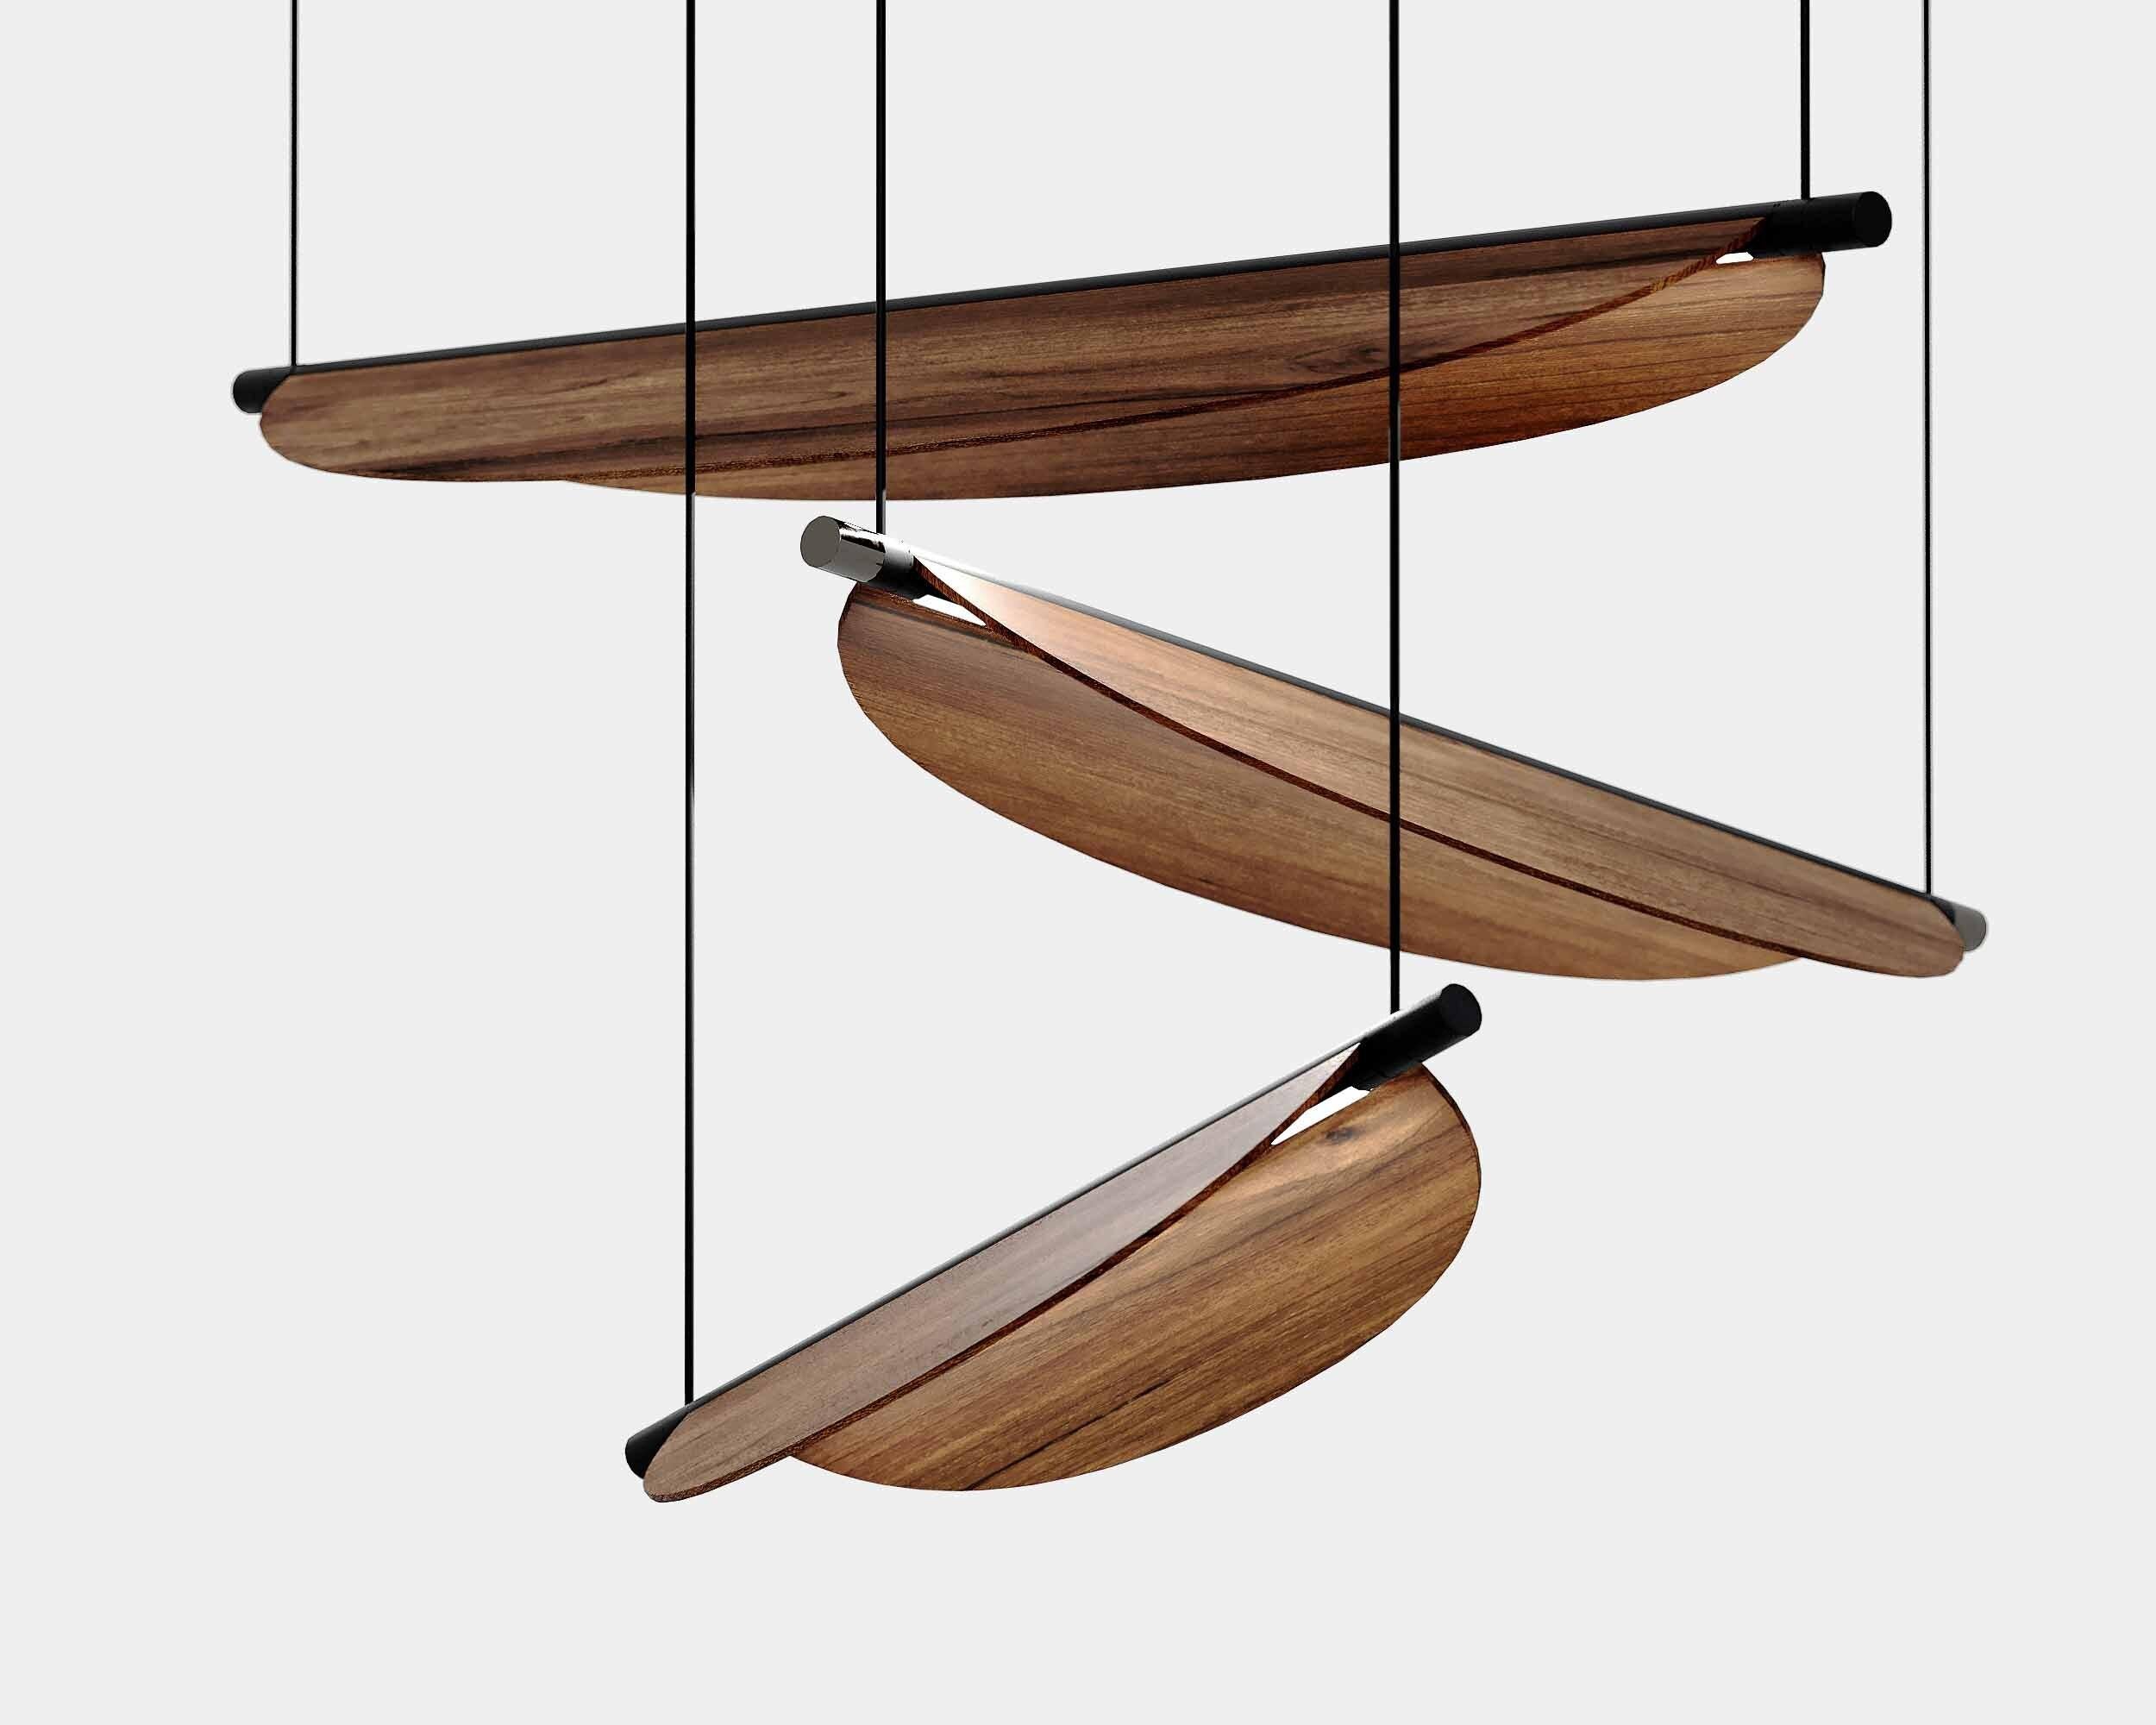 Thula 562.23 by Frederica Biasi x Tooy
Pendant lamp Compliant with US electric system

Model shown: 
- hardware sand black 
- details sand black
- shade light oak

Materials: aluminum, metal, leather, wood

The Thula suspension lamps are based on a